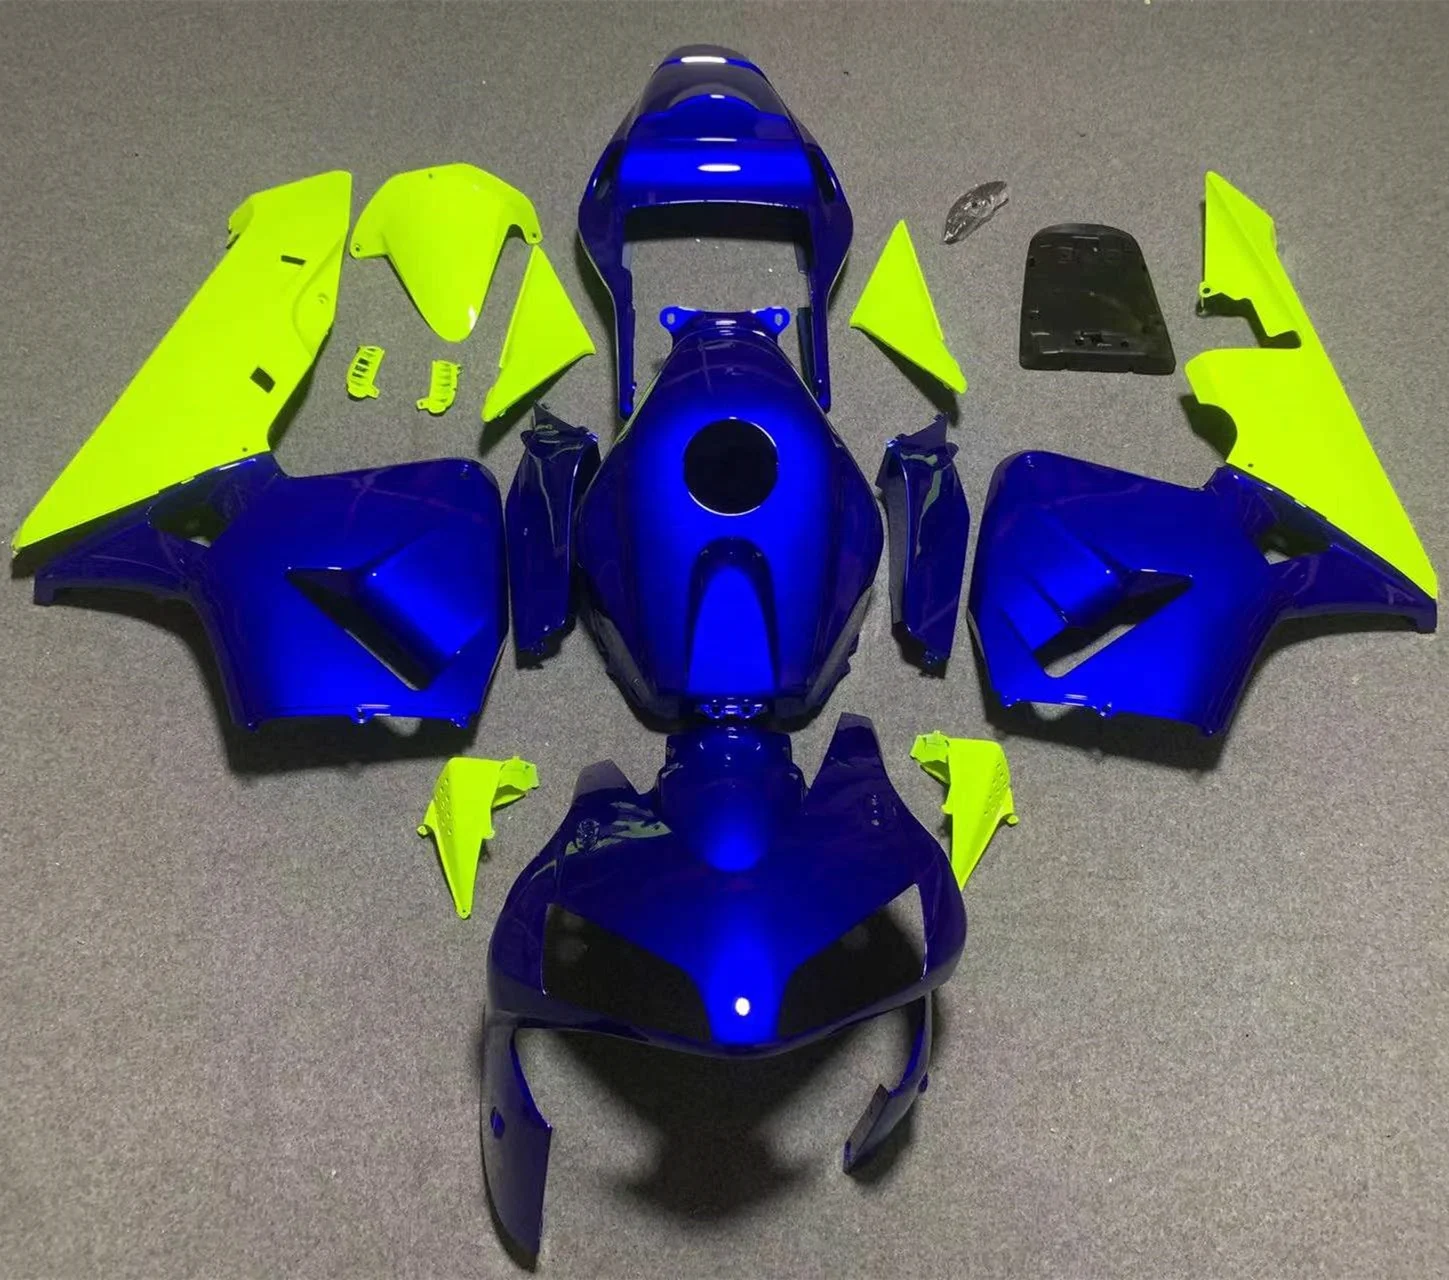 

2022 WHSC Blue And Yellow Motorcycle Accessories For HONDA CBR600 2003-2004, Pictures shown